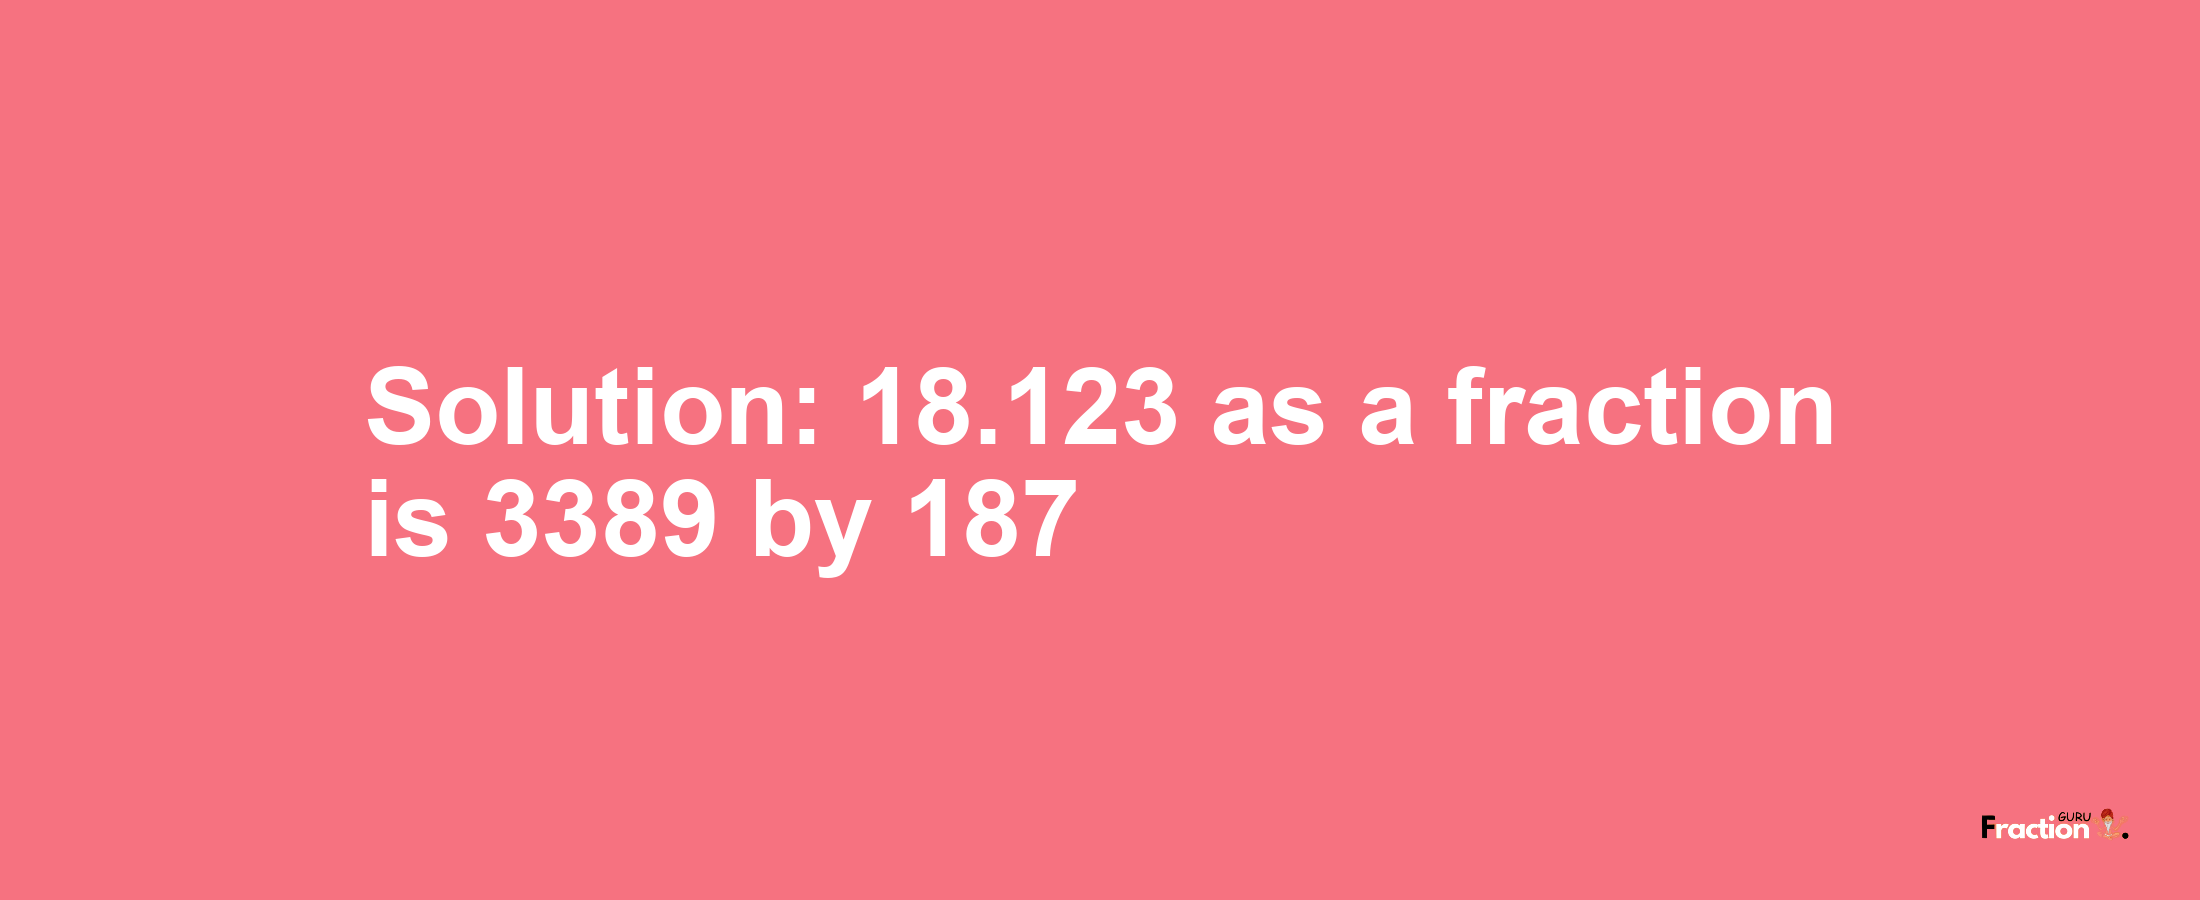 Solution:18.123 as a fraction is 3389/187